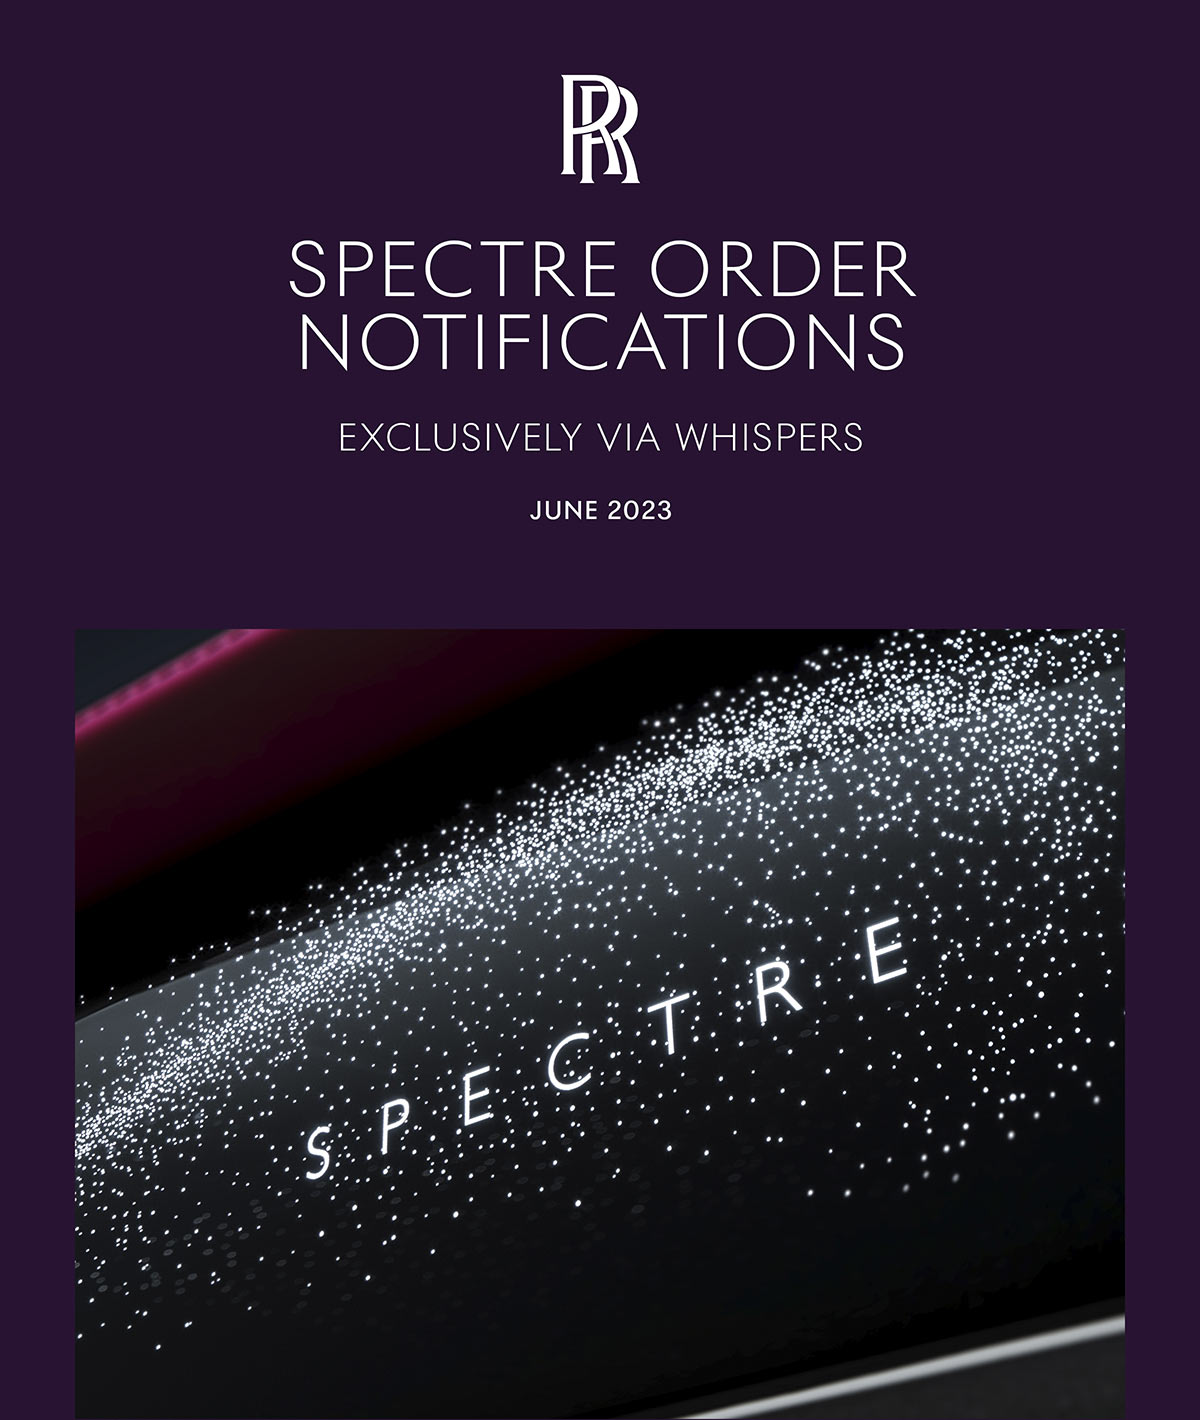 SPECTRE ORDER NOTIFICATION. EXCLUSEVELY VIA WHISPERS. JUNE 2023.